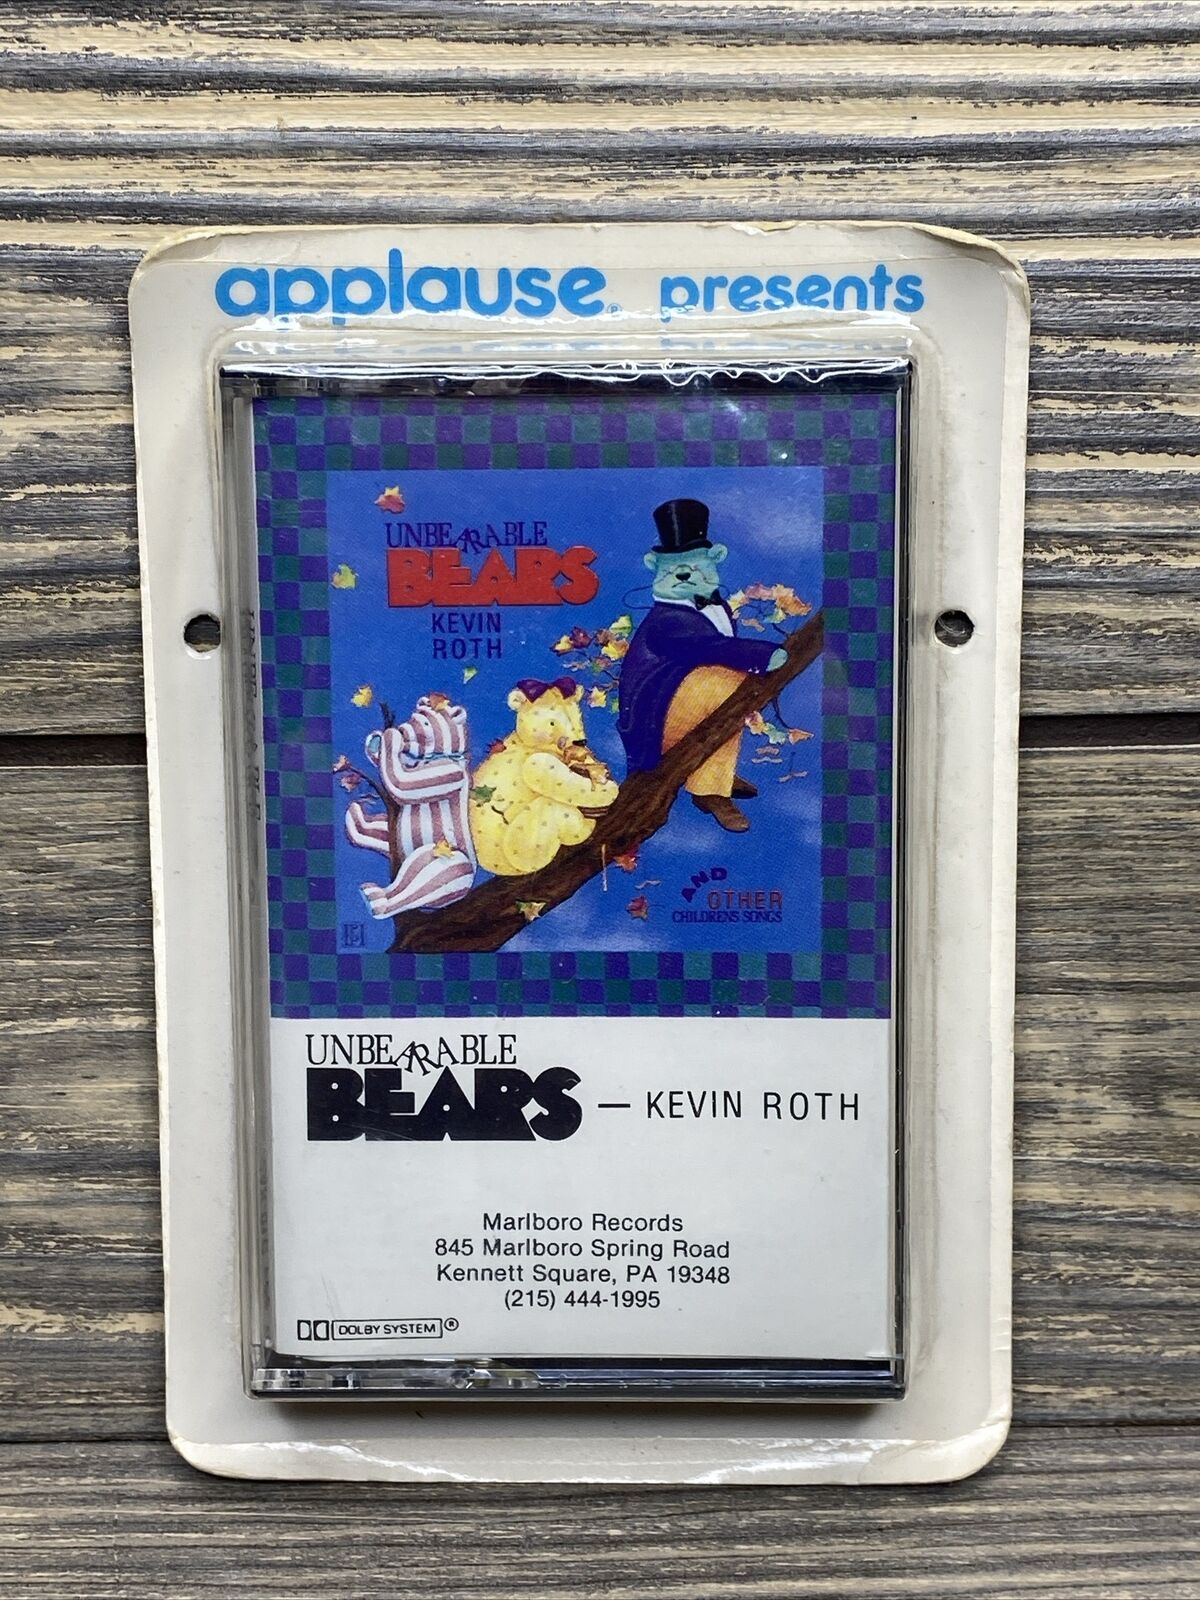 Vintage Applause Unbearable Bears Kevin Roth Cassette Tape 1986 Marlboro Records